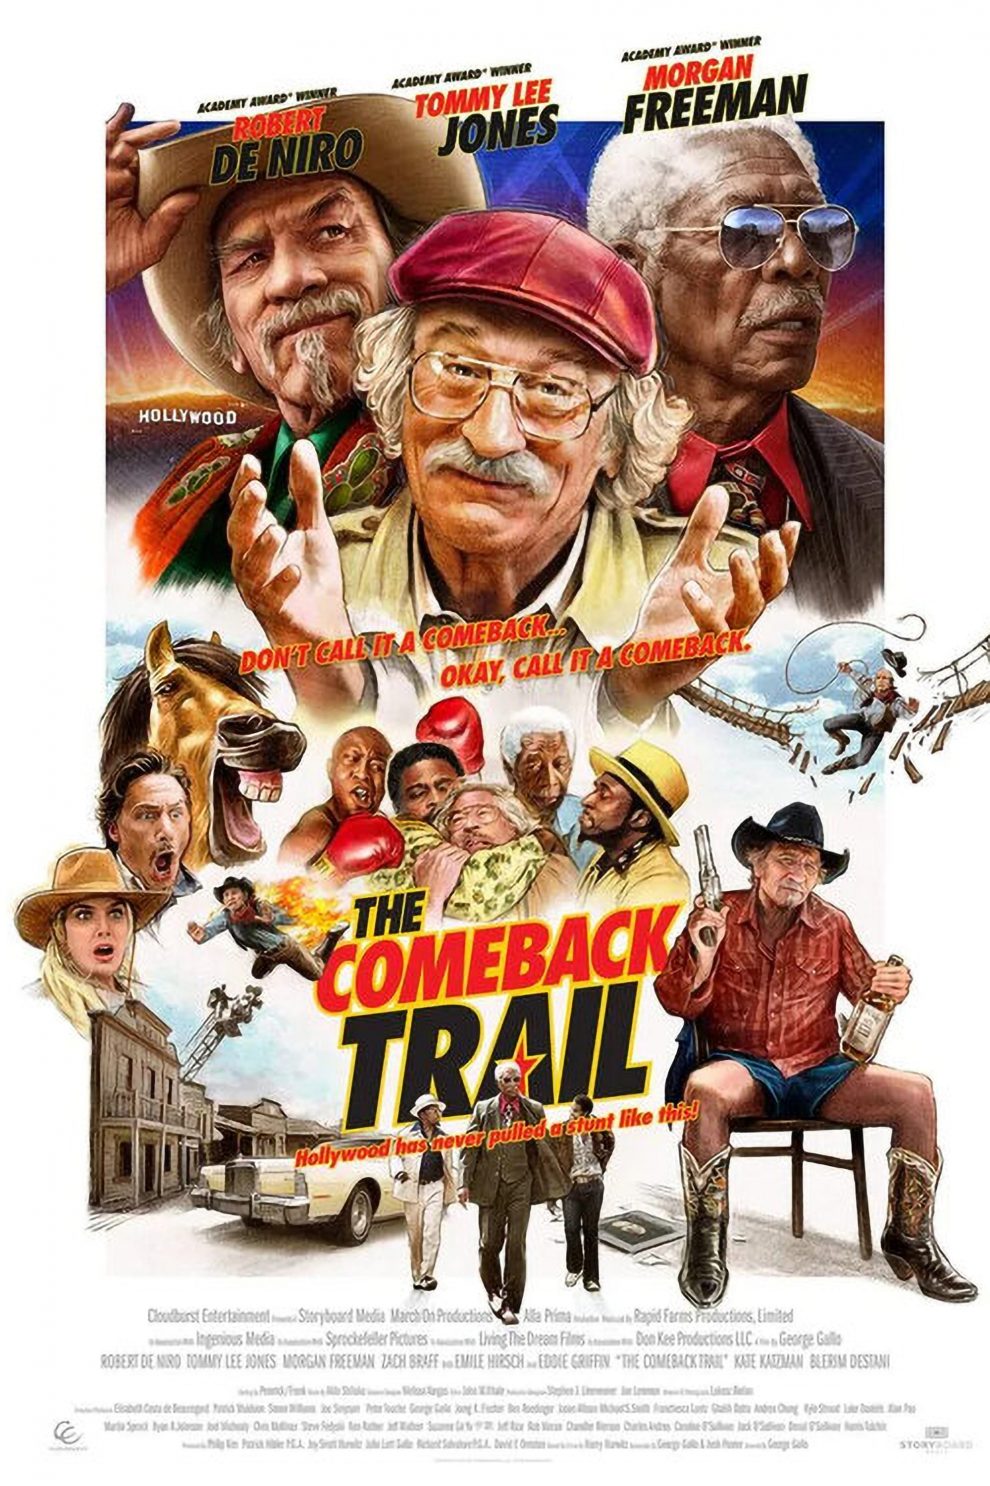 Poster for the movie "The Comeback Trail"